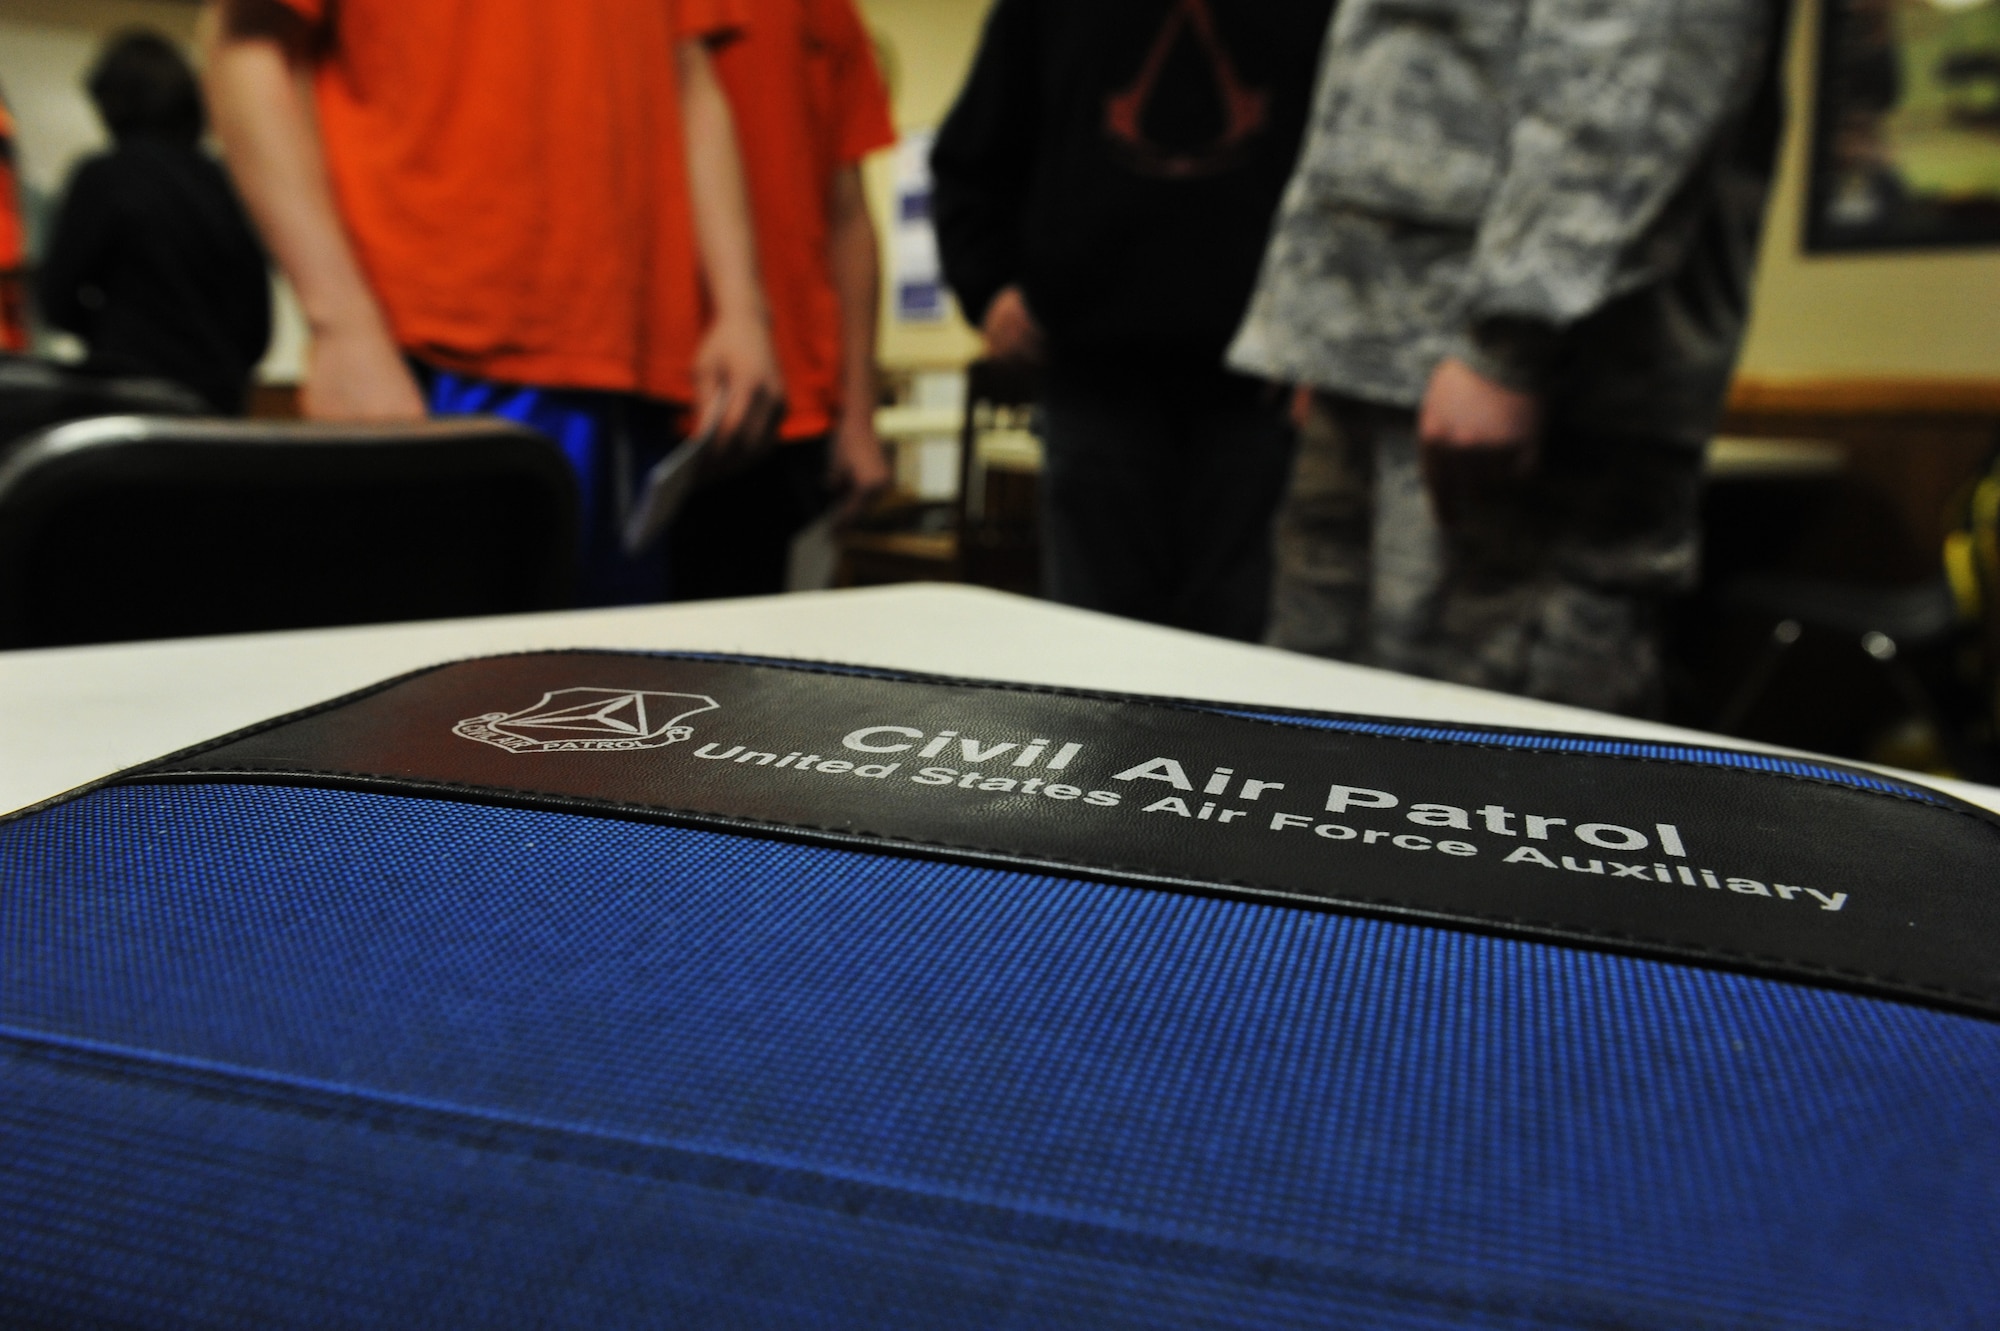 Members of Civil Air Patrol discuss events during their weekly meeting, March 28, 2013, in Sedalia, Mo. Meetings focus on leadership, aerospace education, character development and physical fitness. (U.S. Air Force photo by Heidi Hunt/Released)